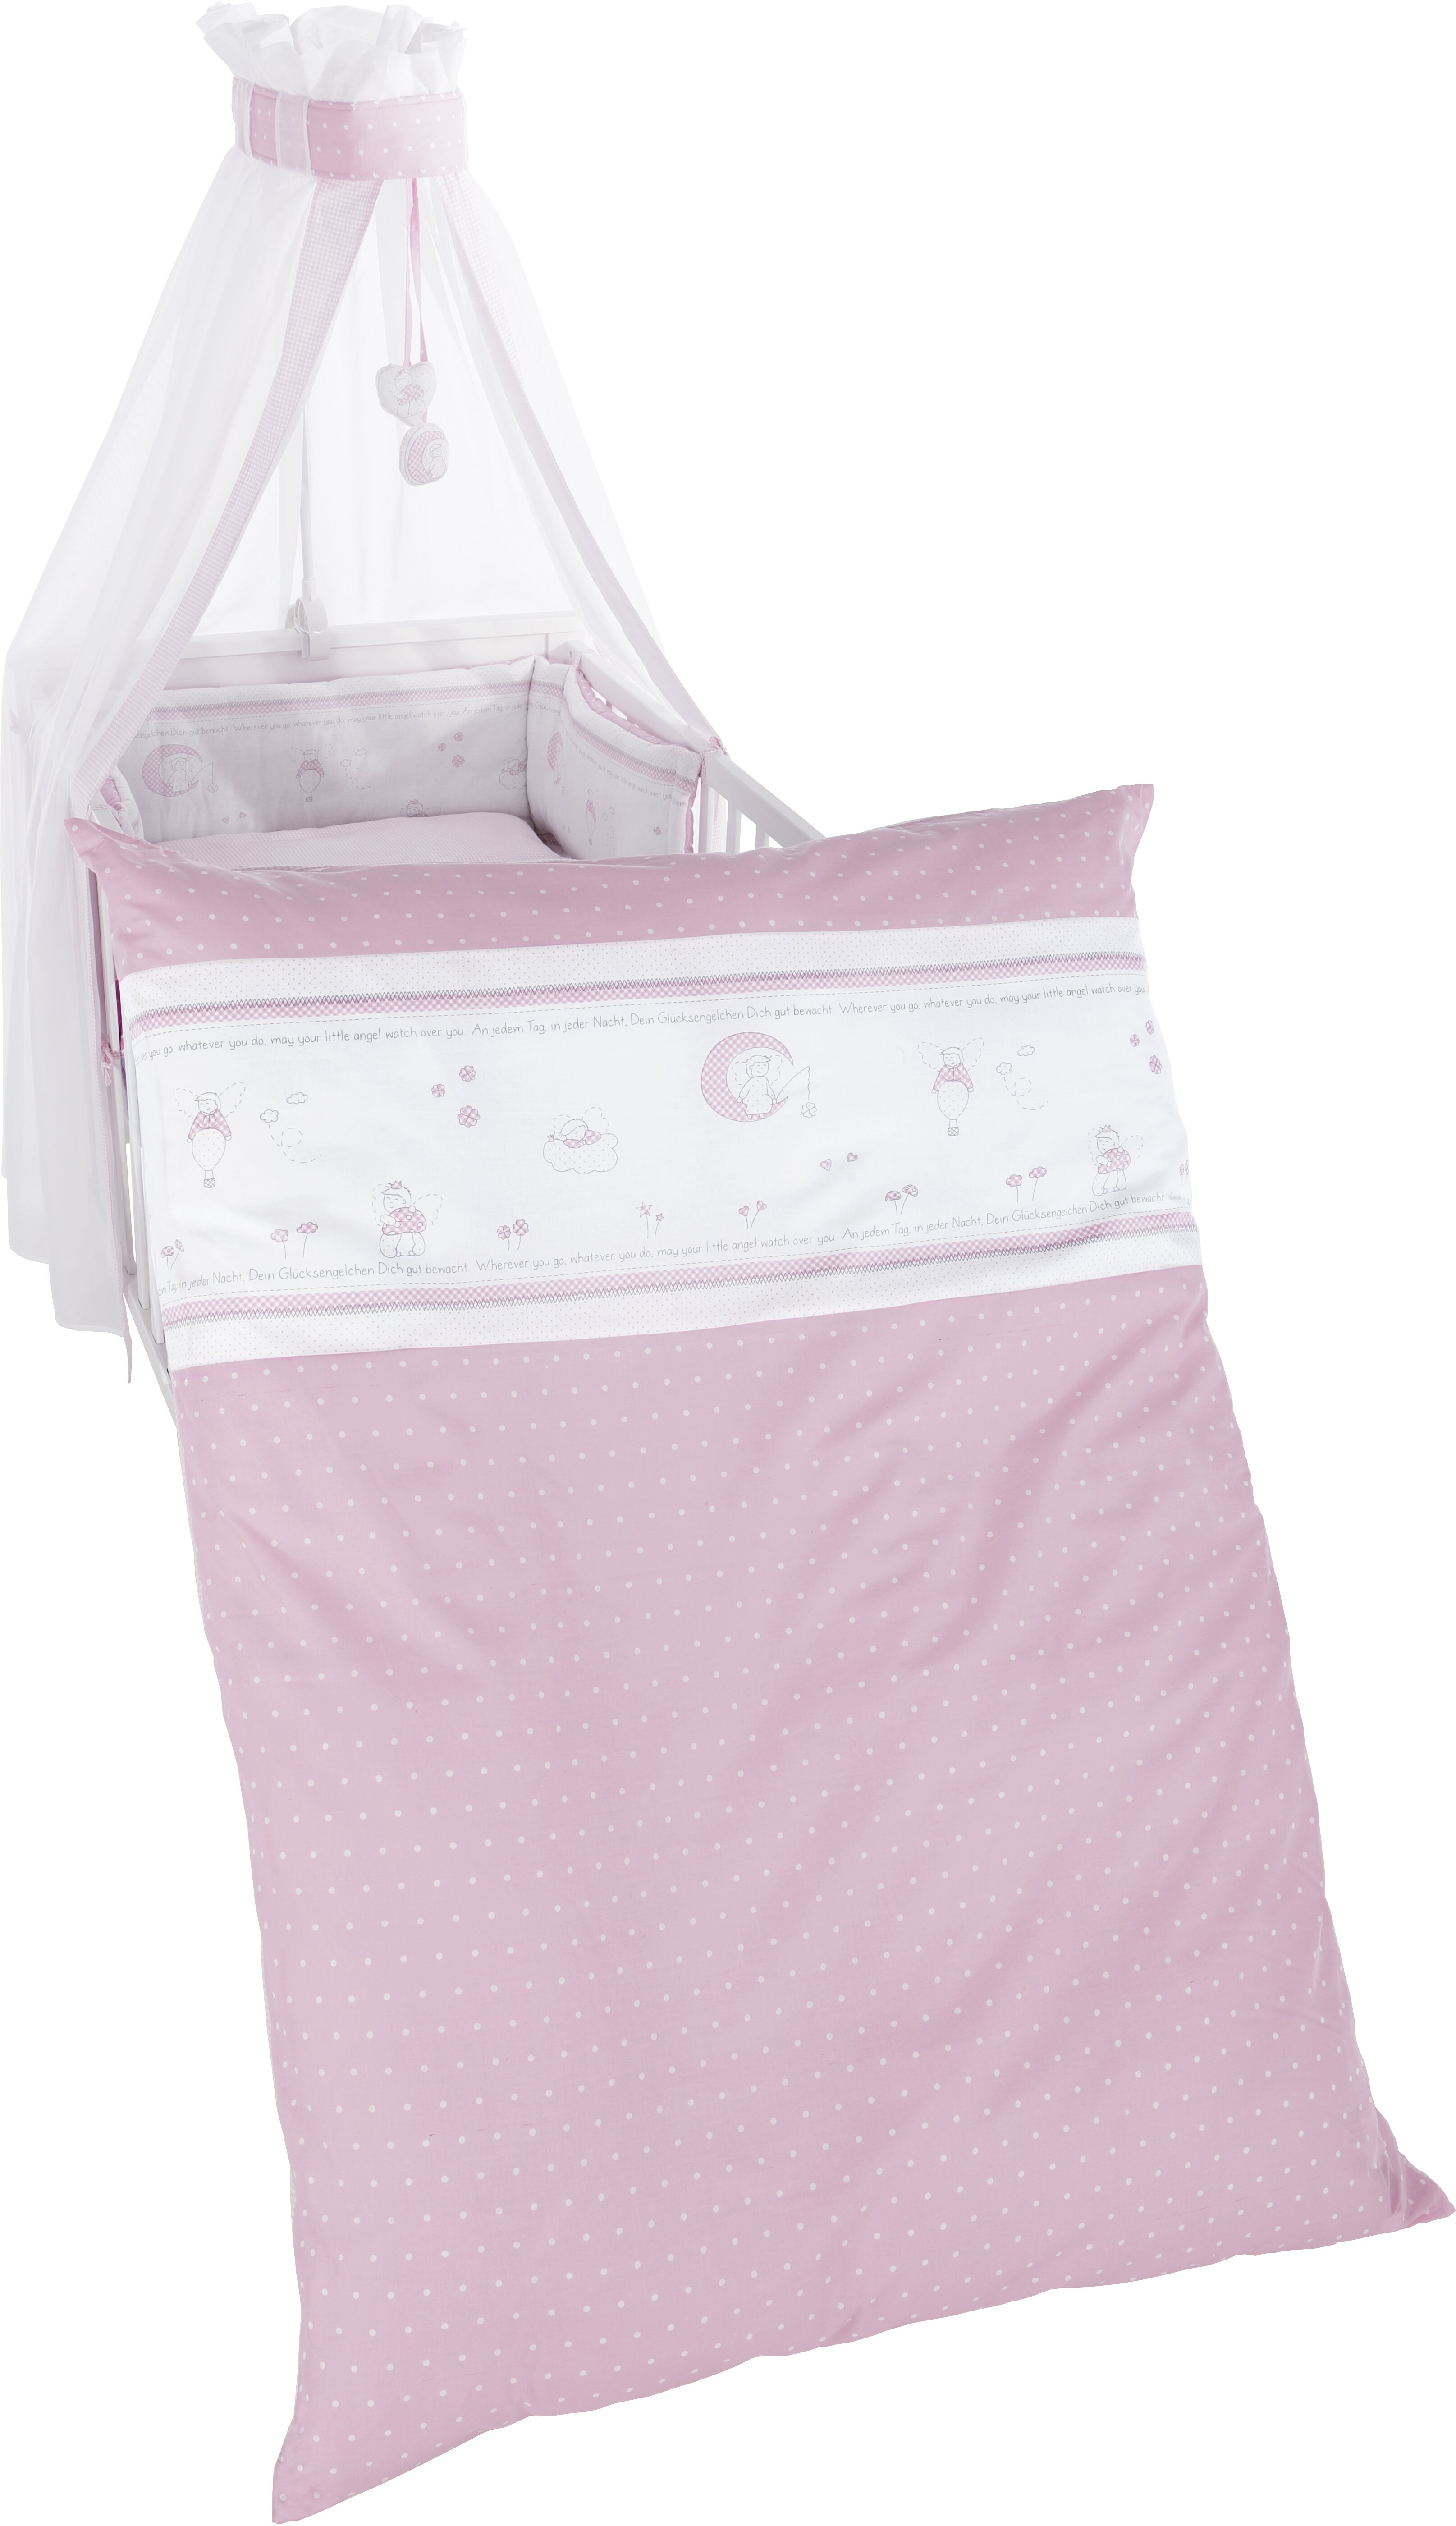 baby pink cot bedding